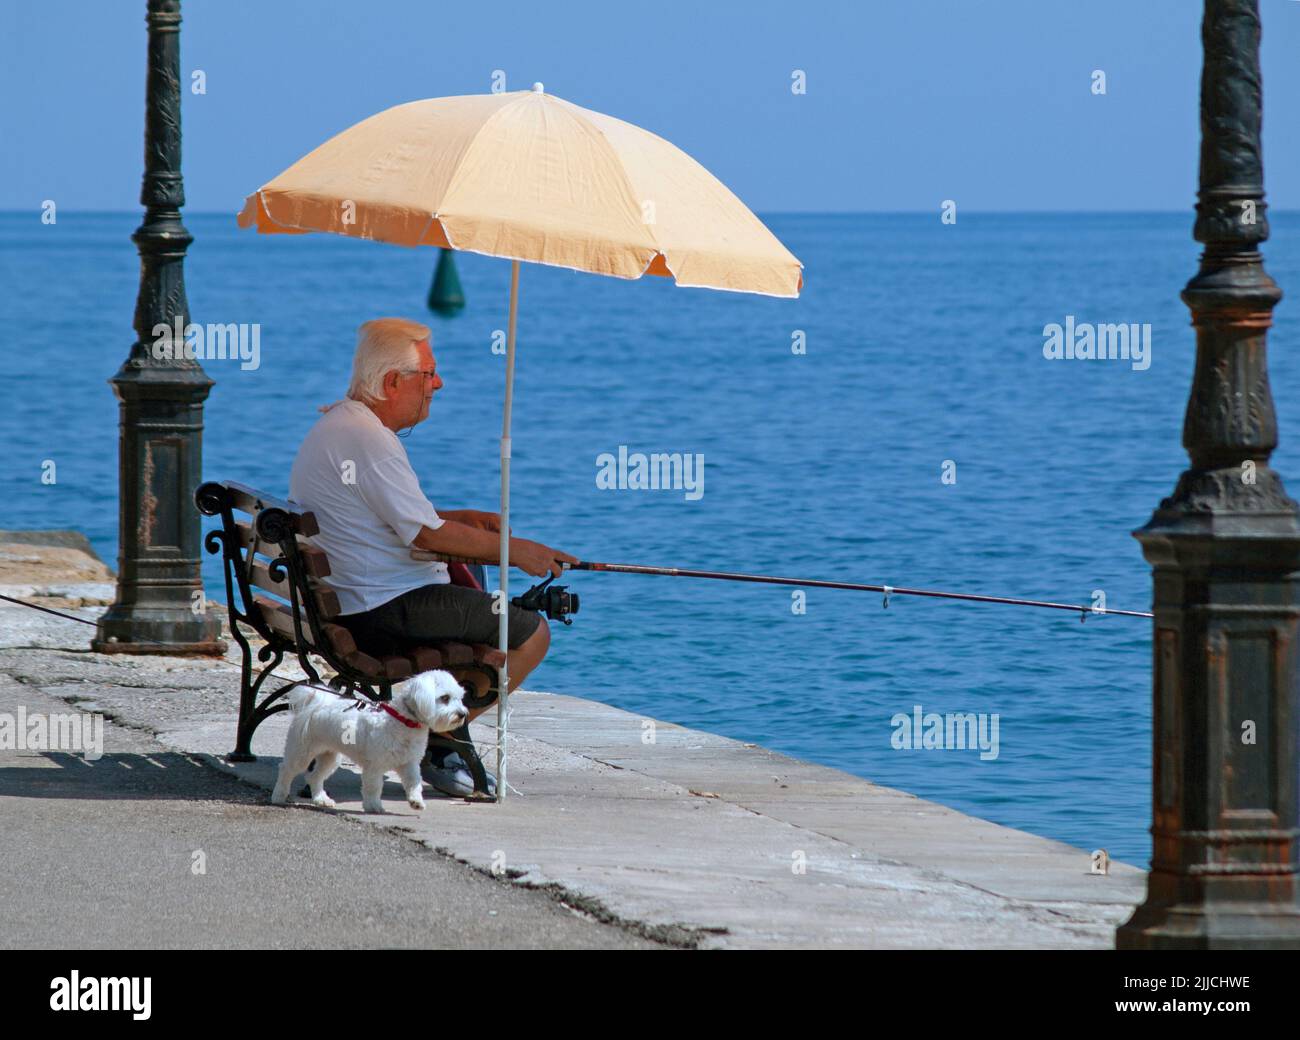 A man fishes in the Old Venetian Harbour of Chania, Crete Stock Photo